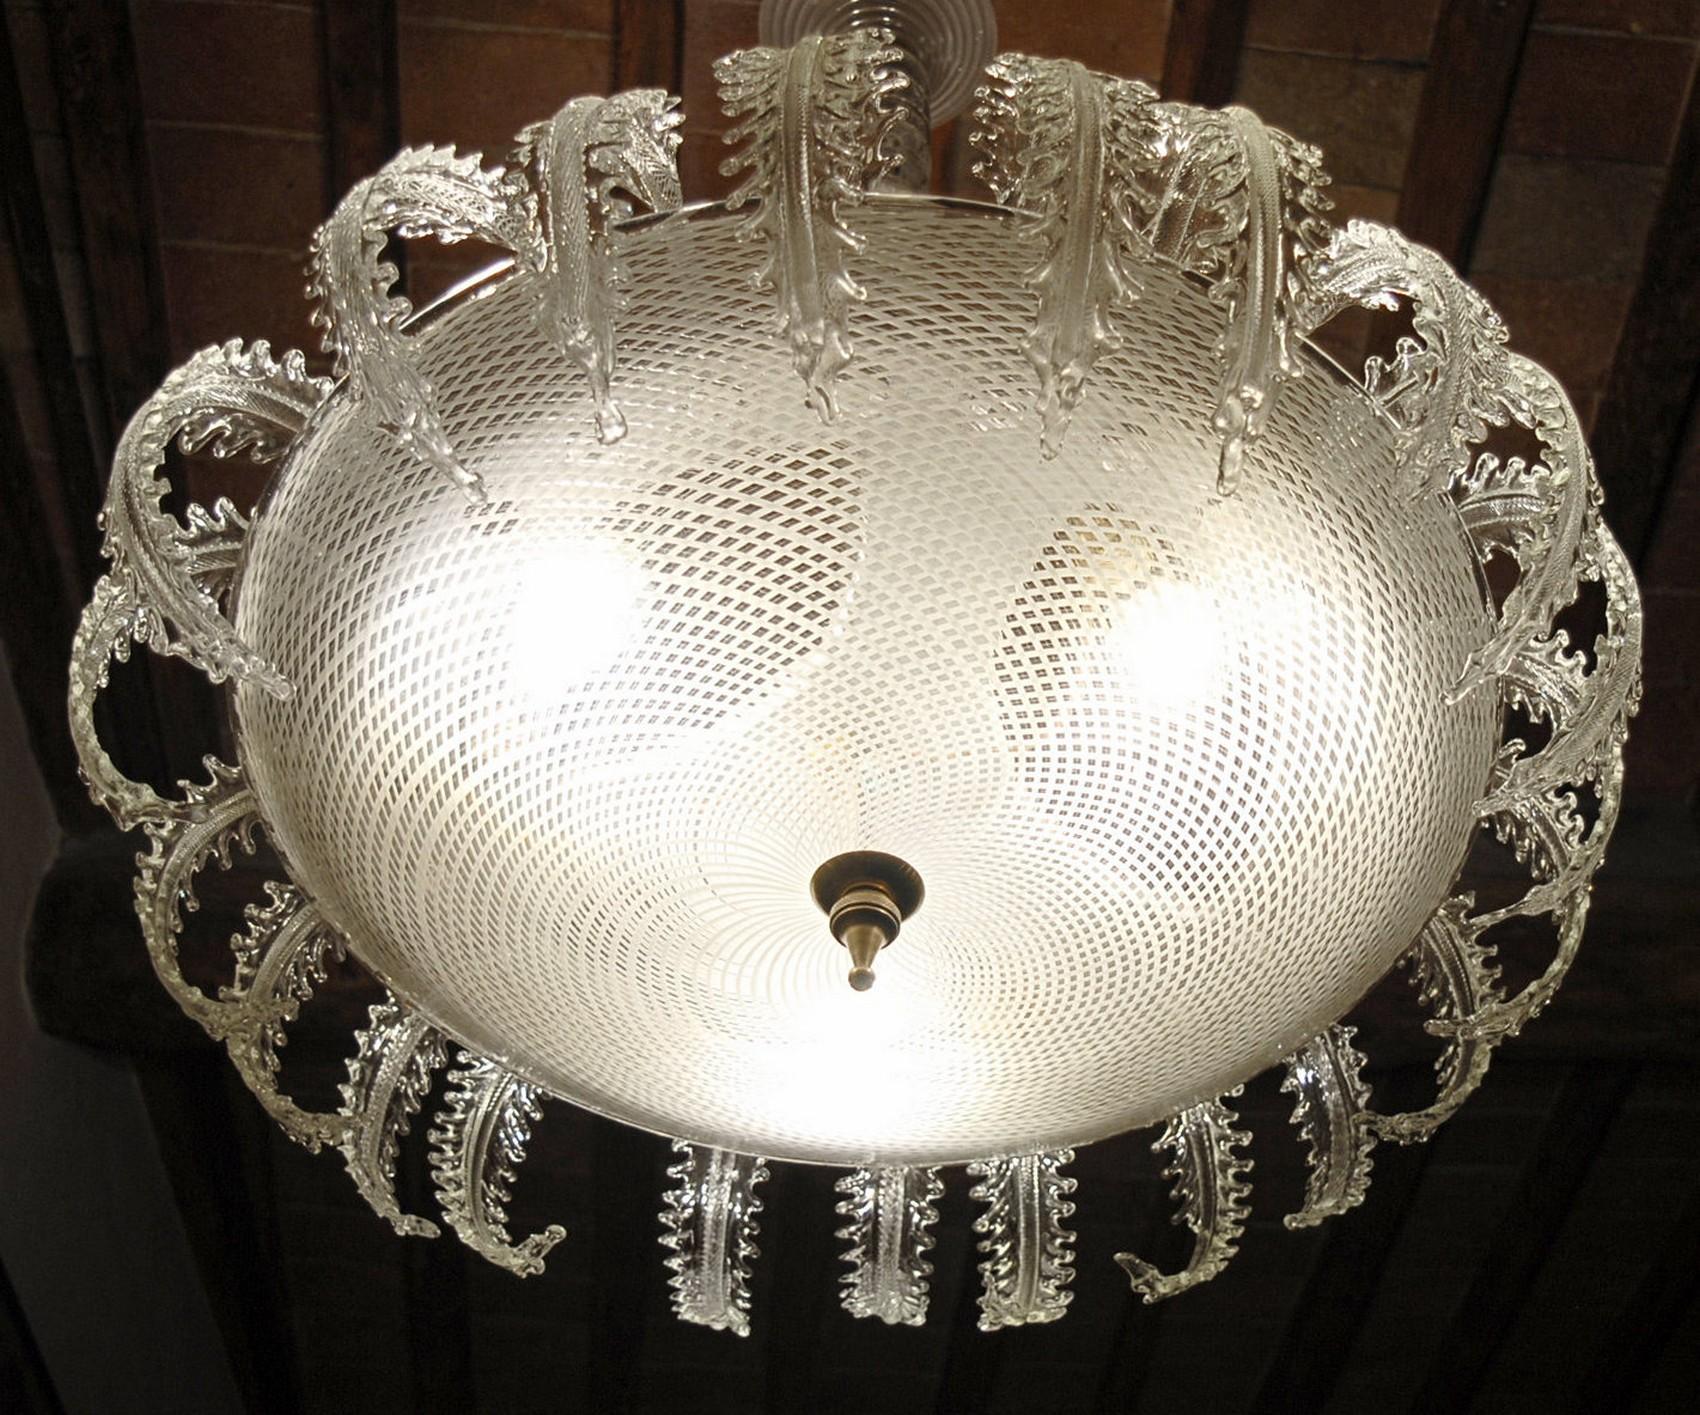 A beautiful chandelier, carries the largest reticello disc I have ever seen or could be found on auctions or other fine dealers. The great reticello bowl is surrounded and crowned by 24 clear leaves that are topping the chandelier and making a